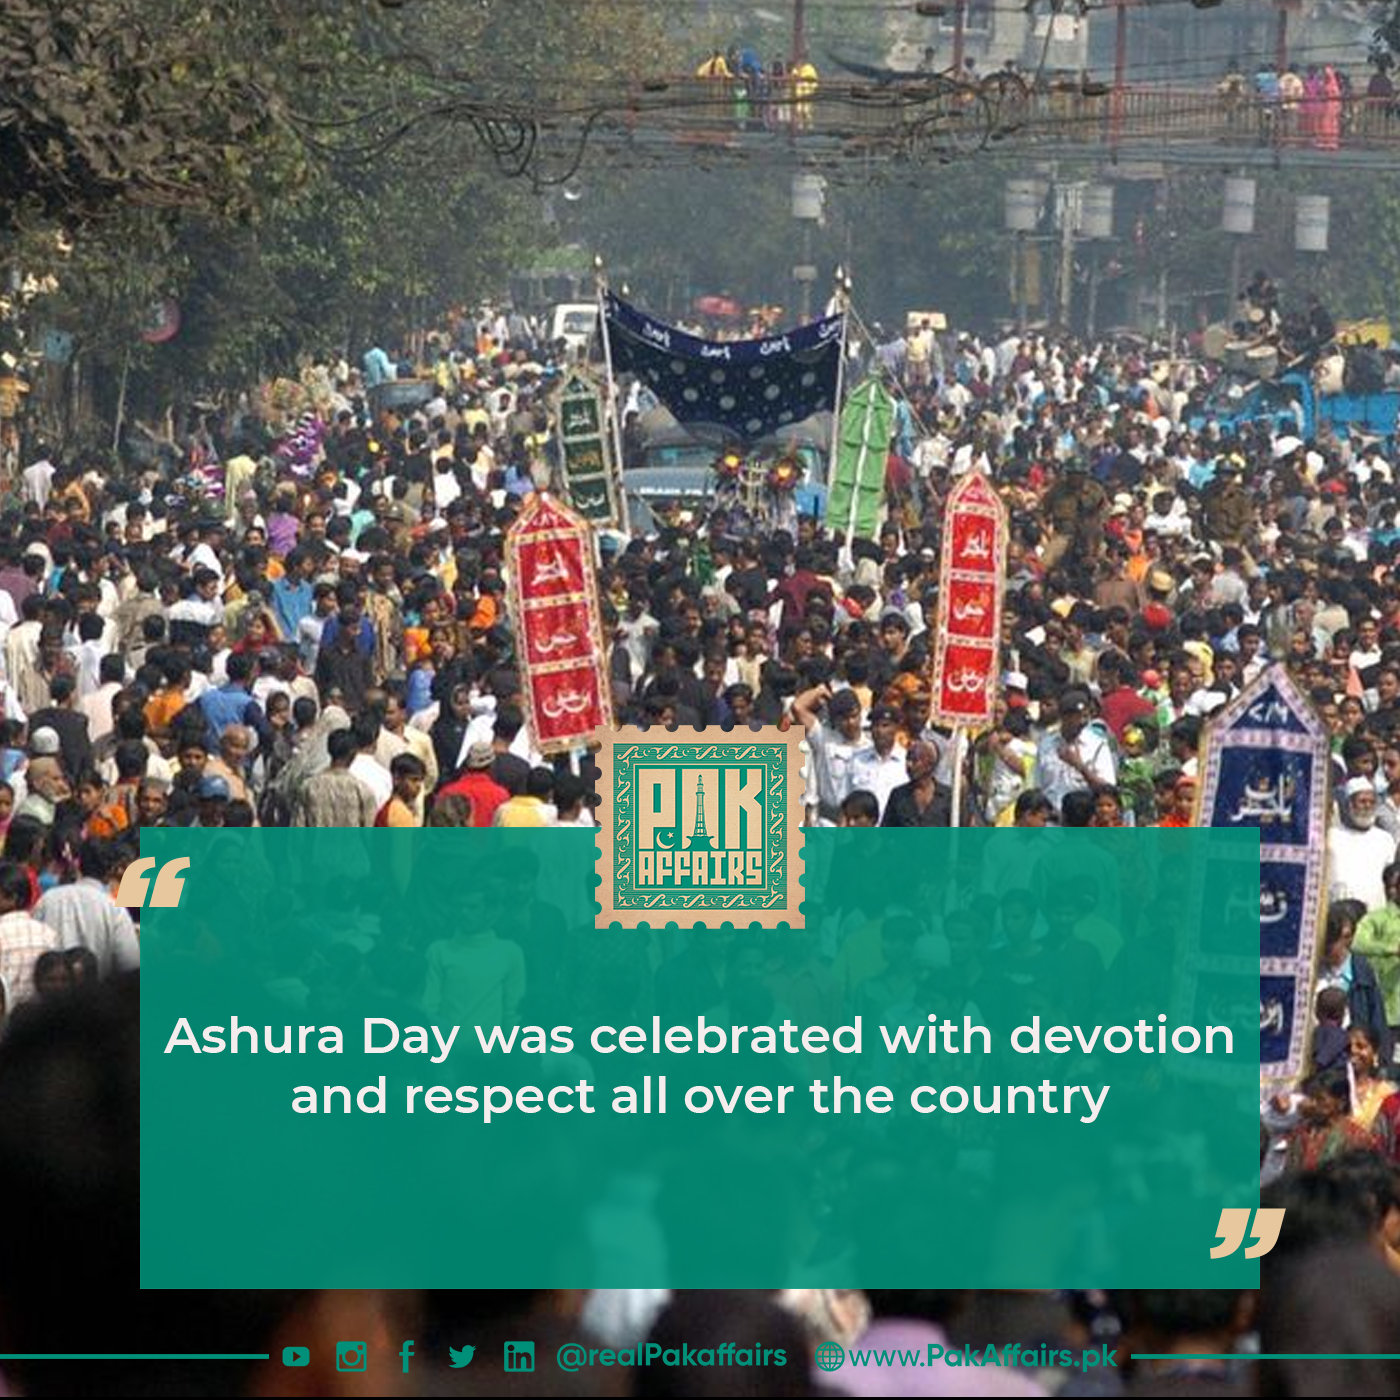 Ashura Day was celebrated with devotion and respect all over the country